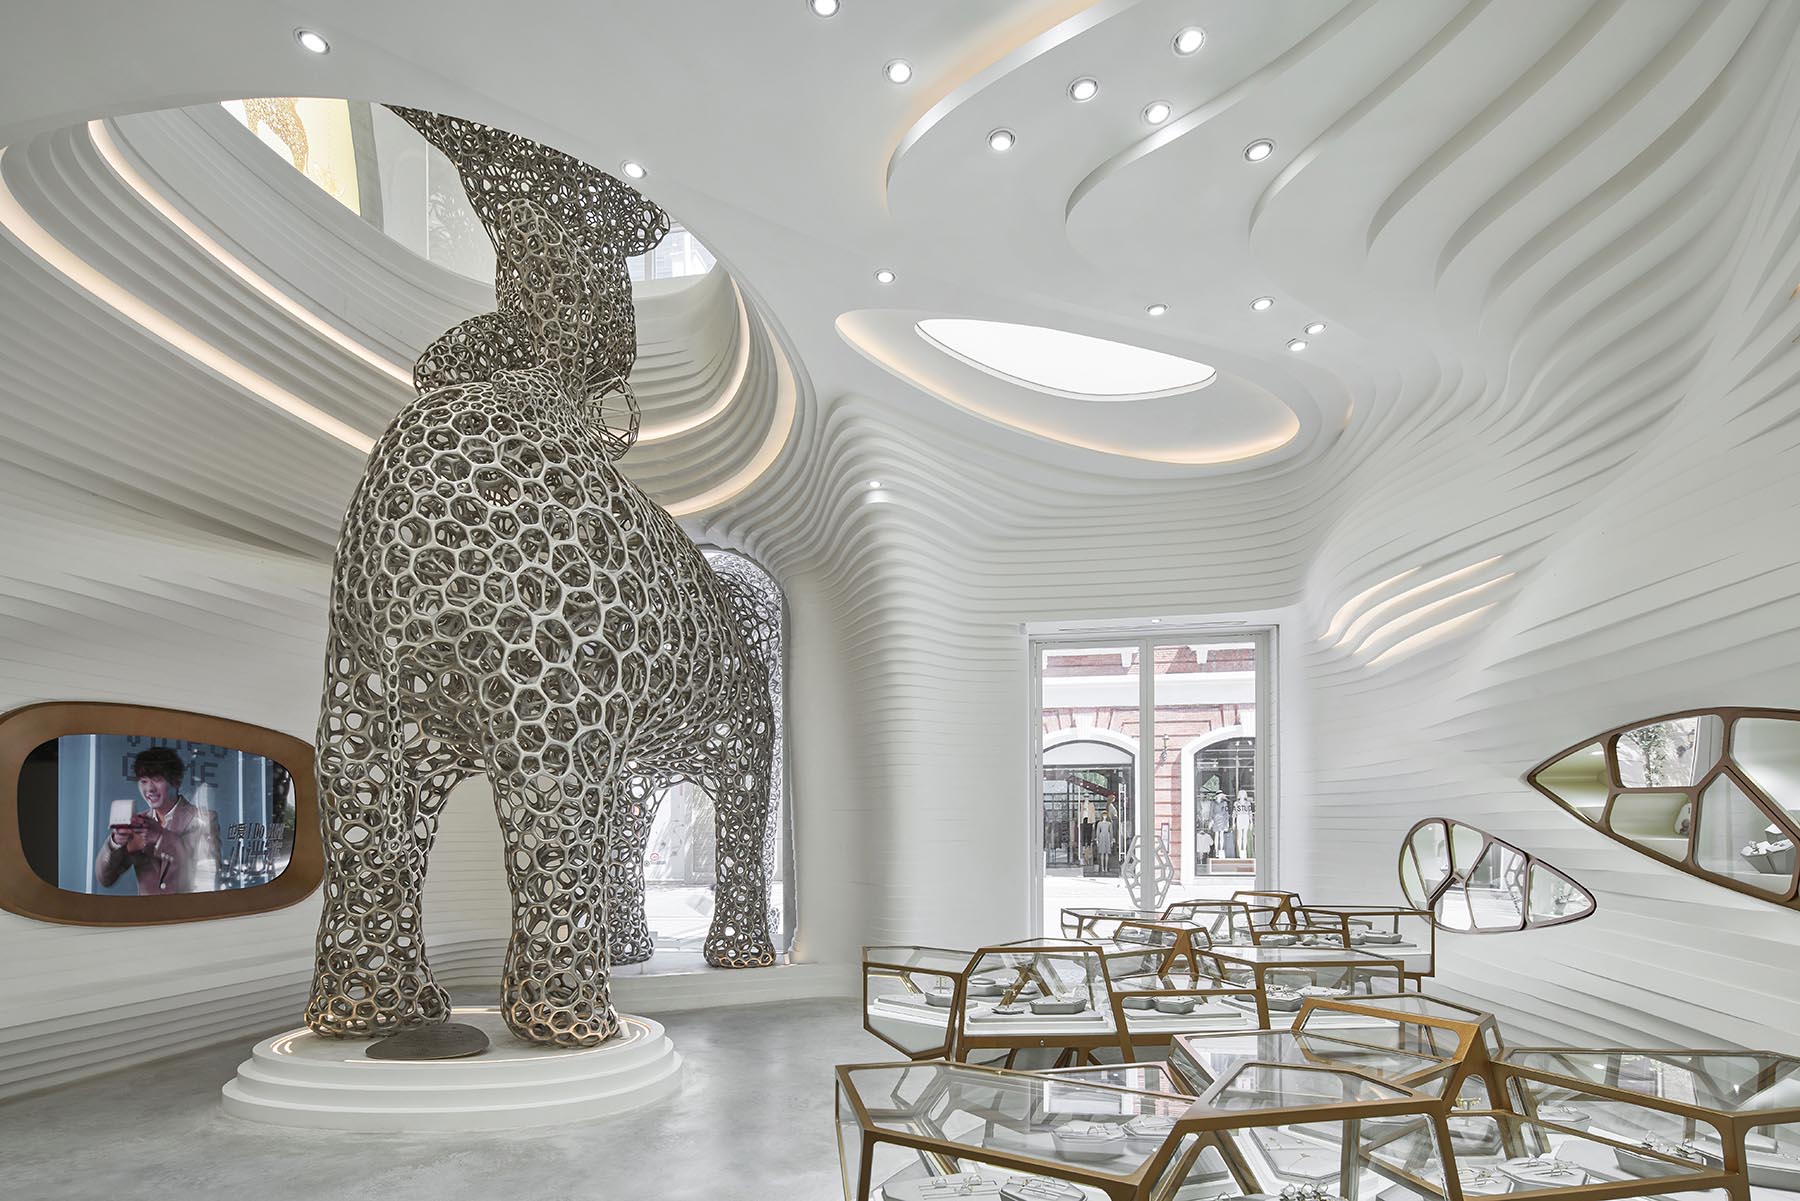 A modern retail store with an eye-catching facade, large sculptures, and a cave-like interior.